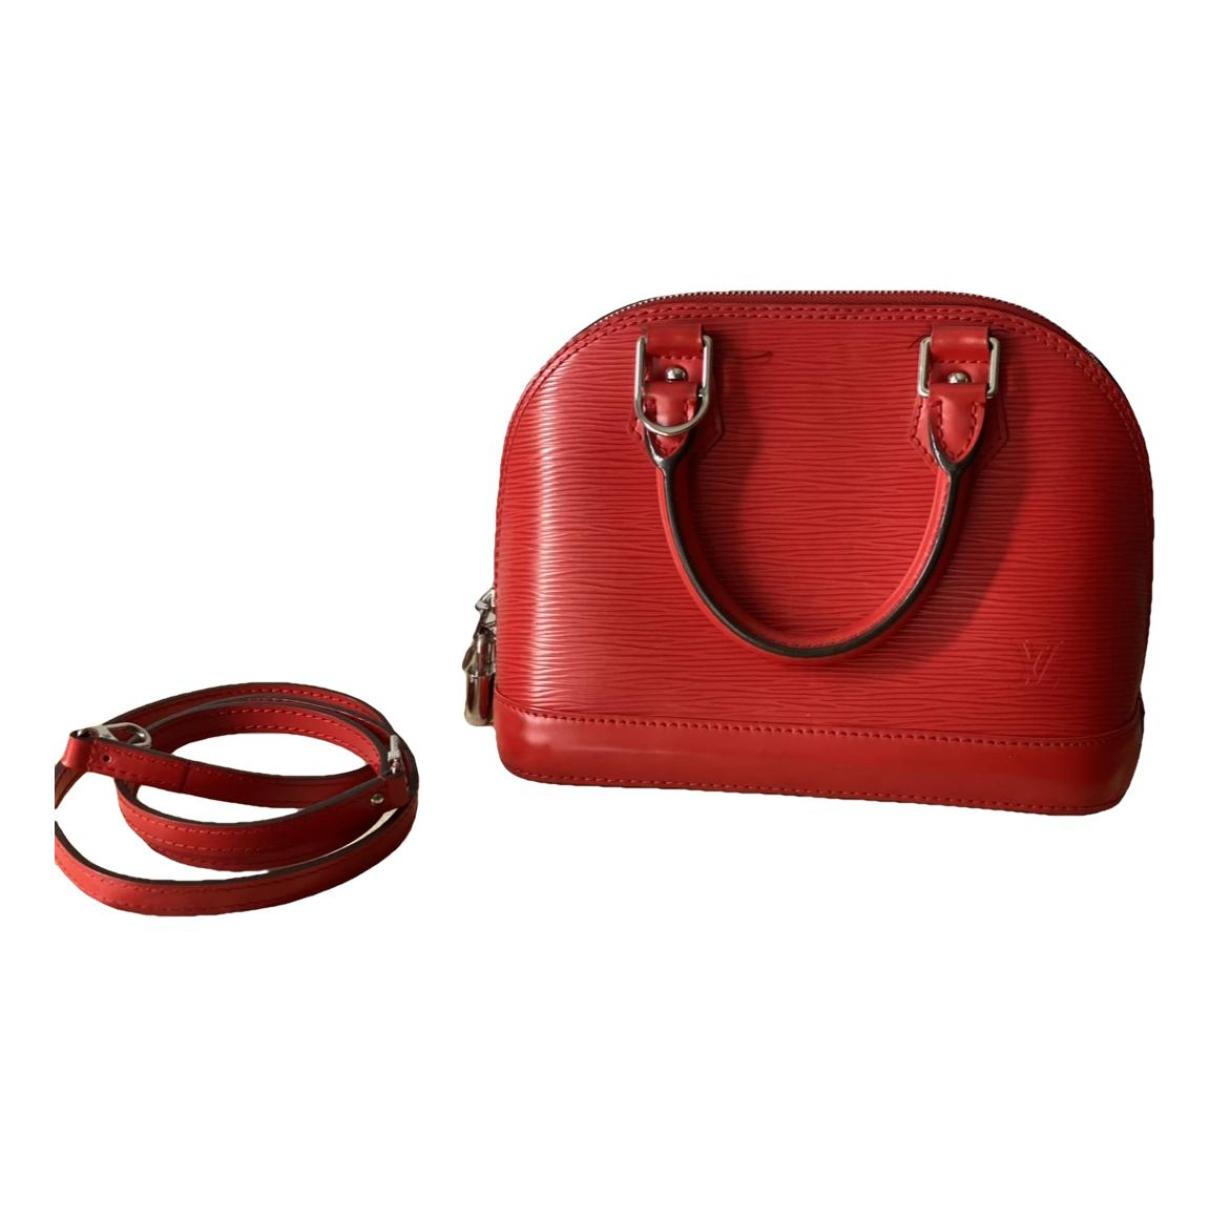 Louis Vuitton - Authenticated Alma Bb Handbag - Leather Red for Women, Very Good Condition